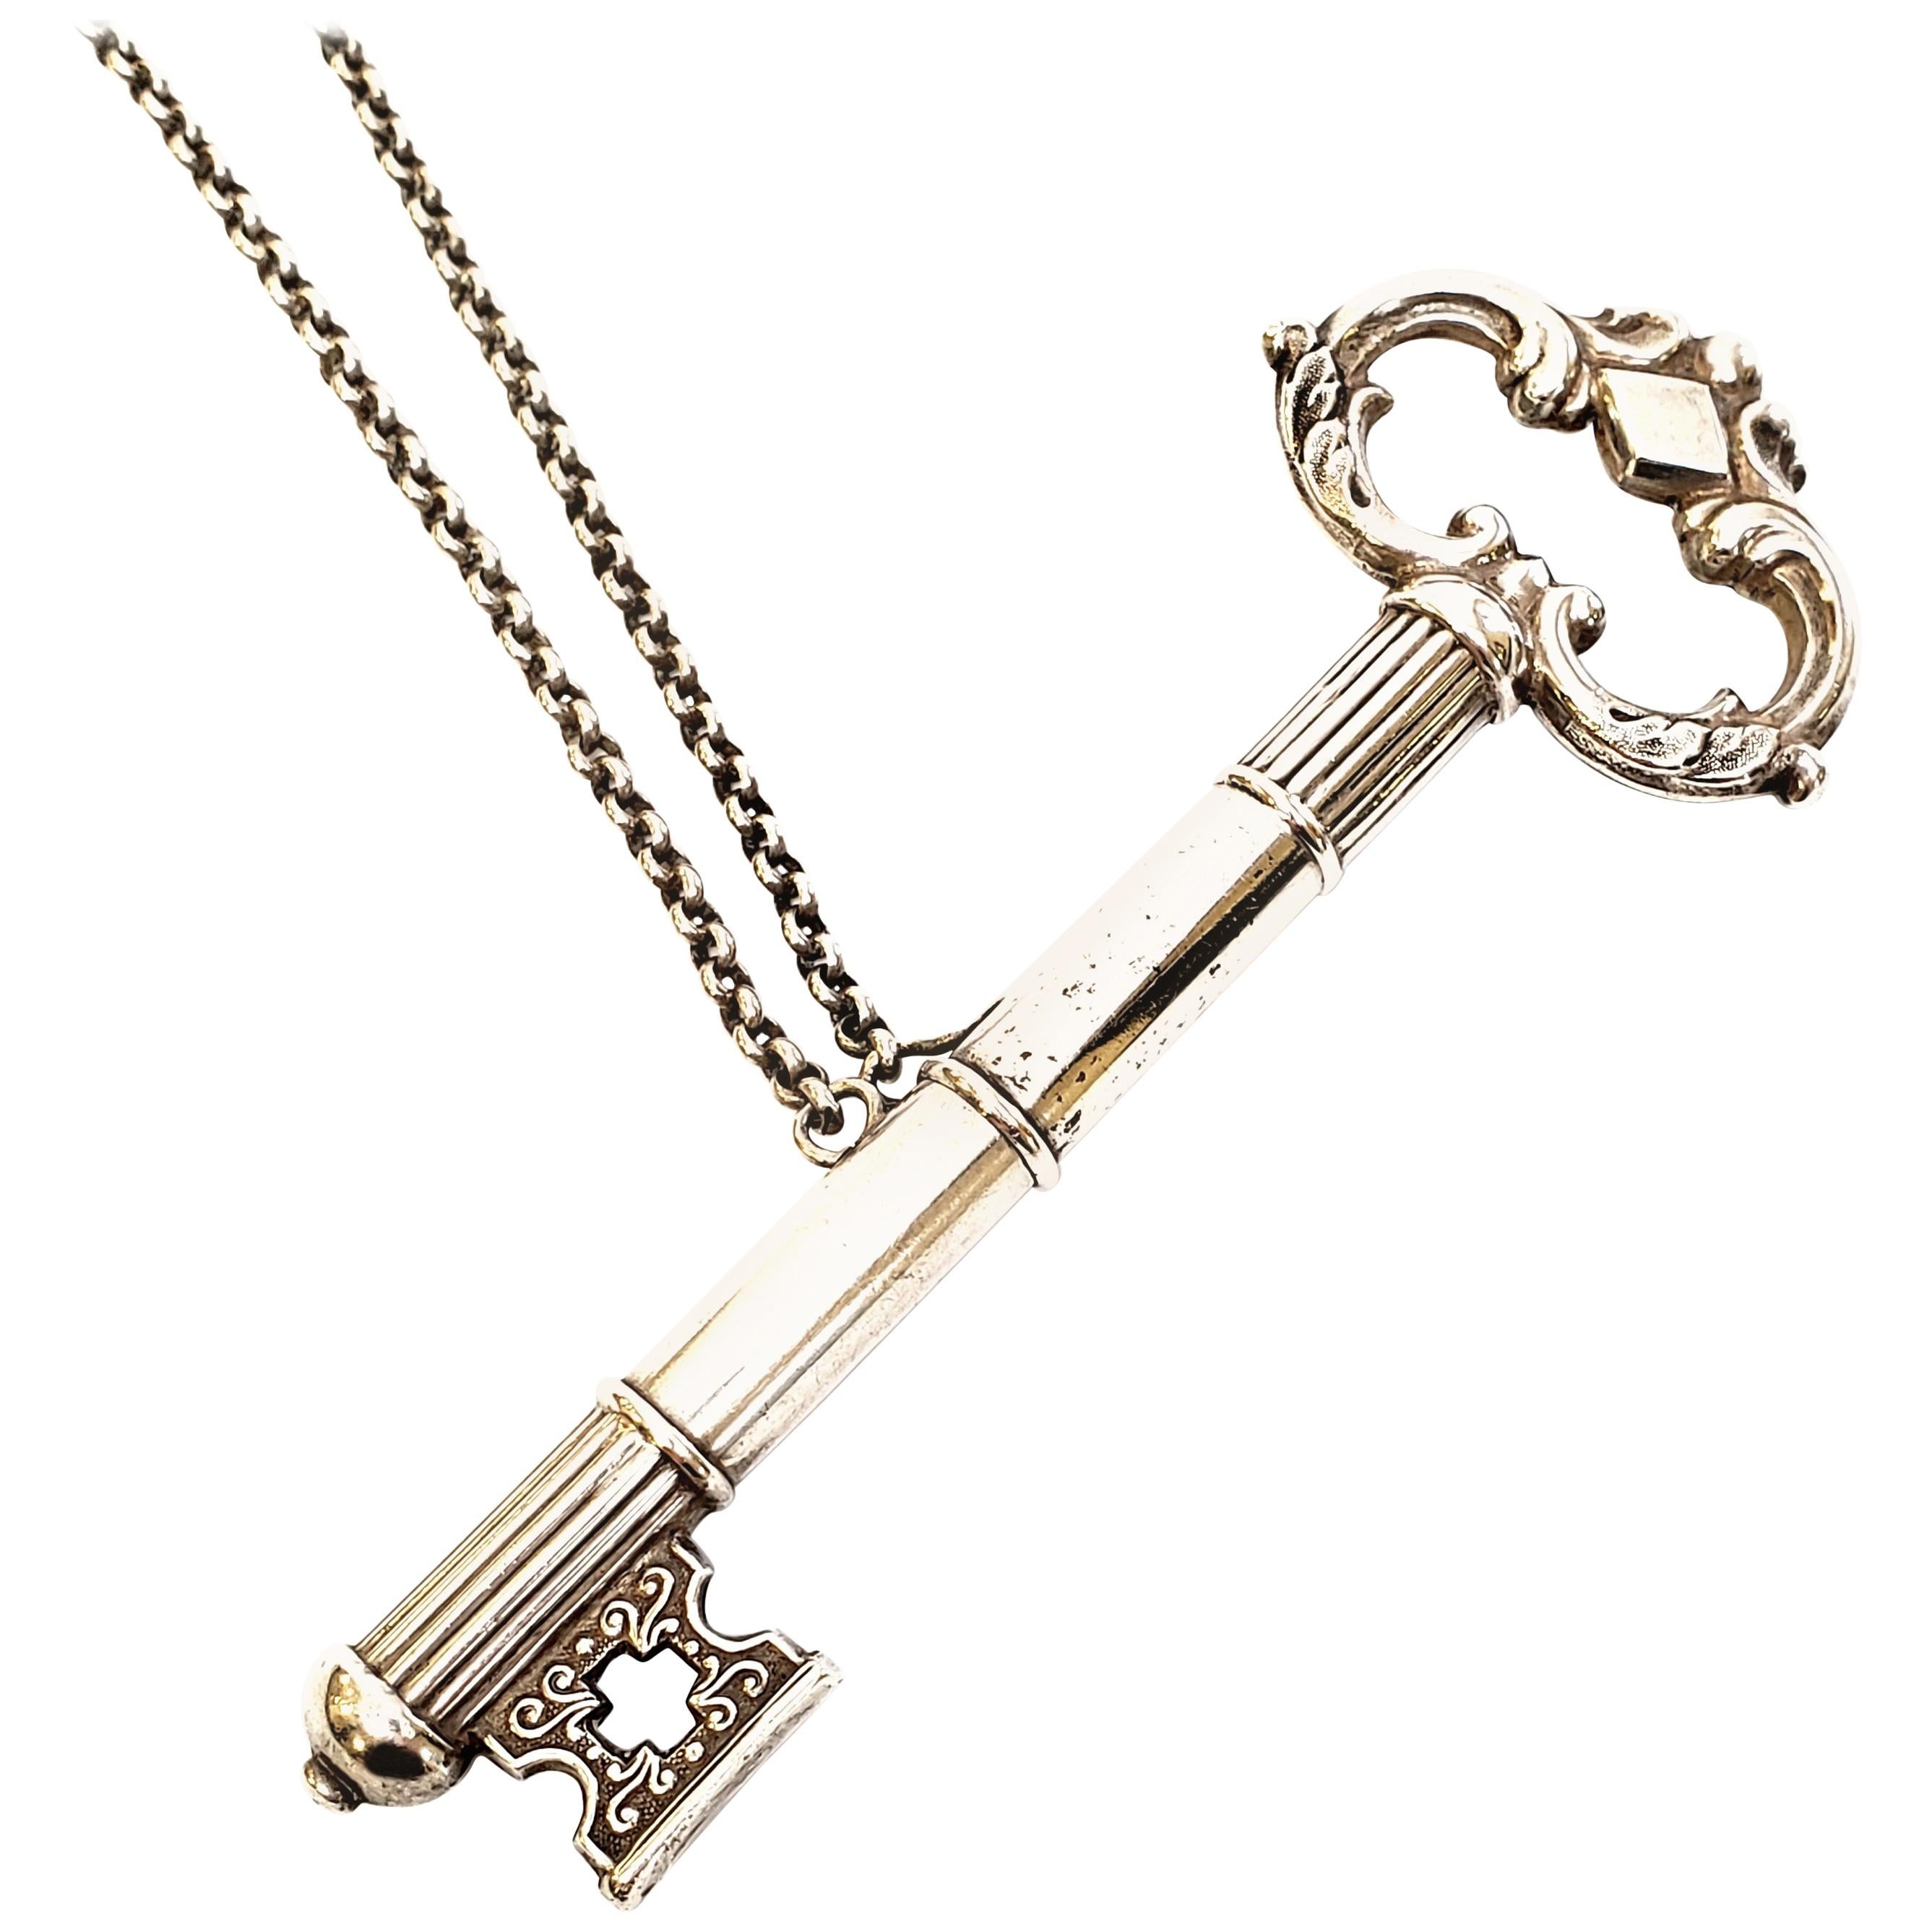 Silver Key Needle Case with Chatelaine Chain